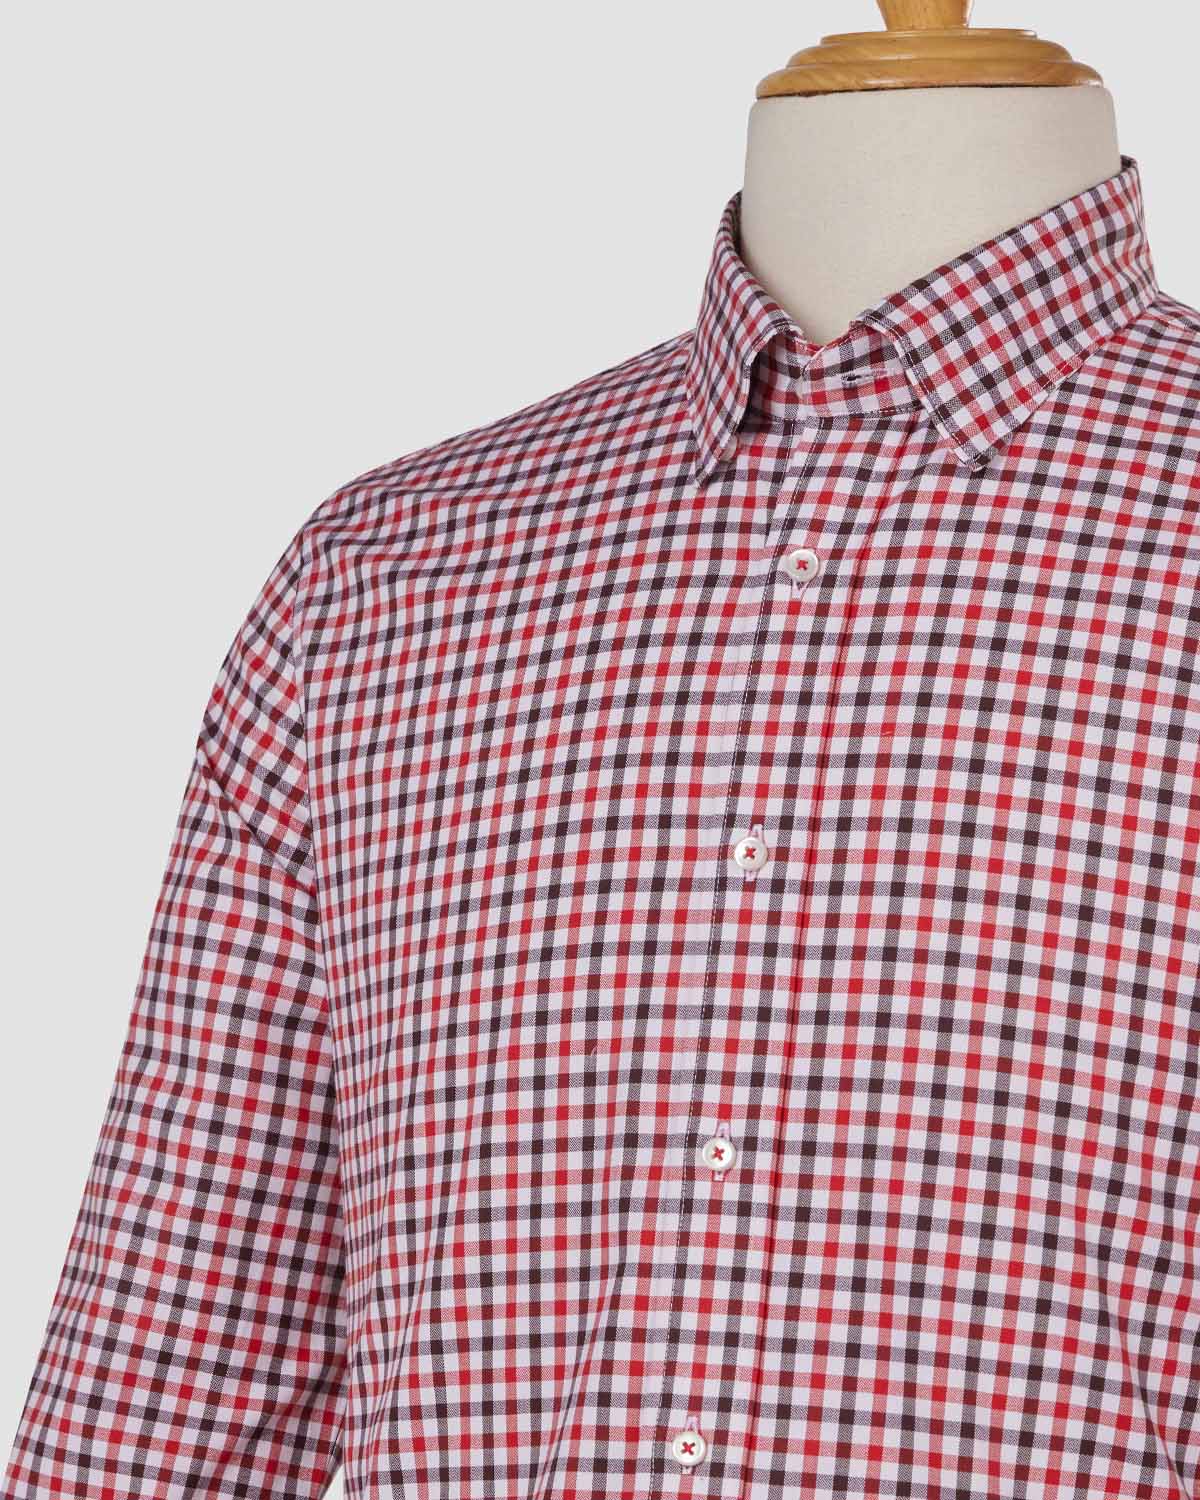 Monti Block Party Checked Shirt